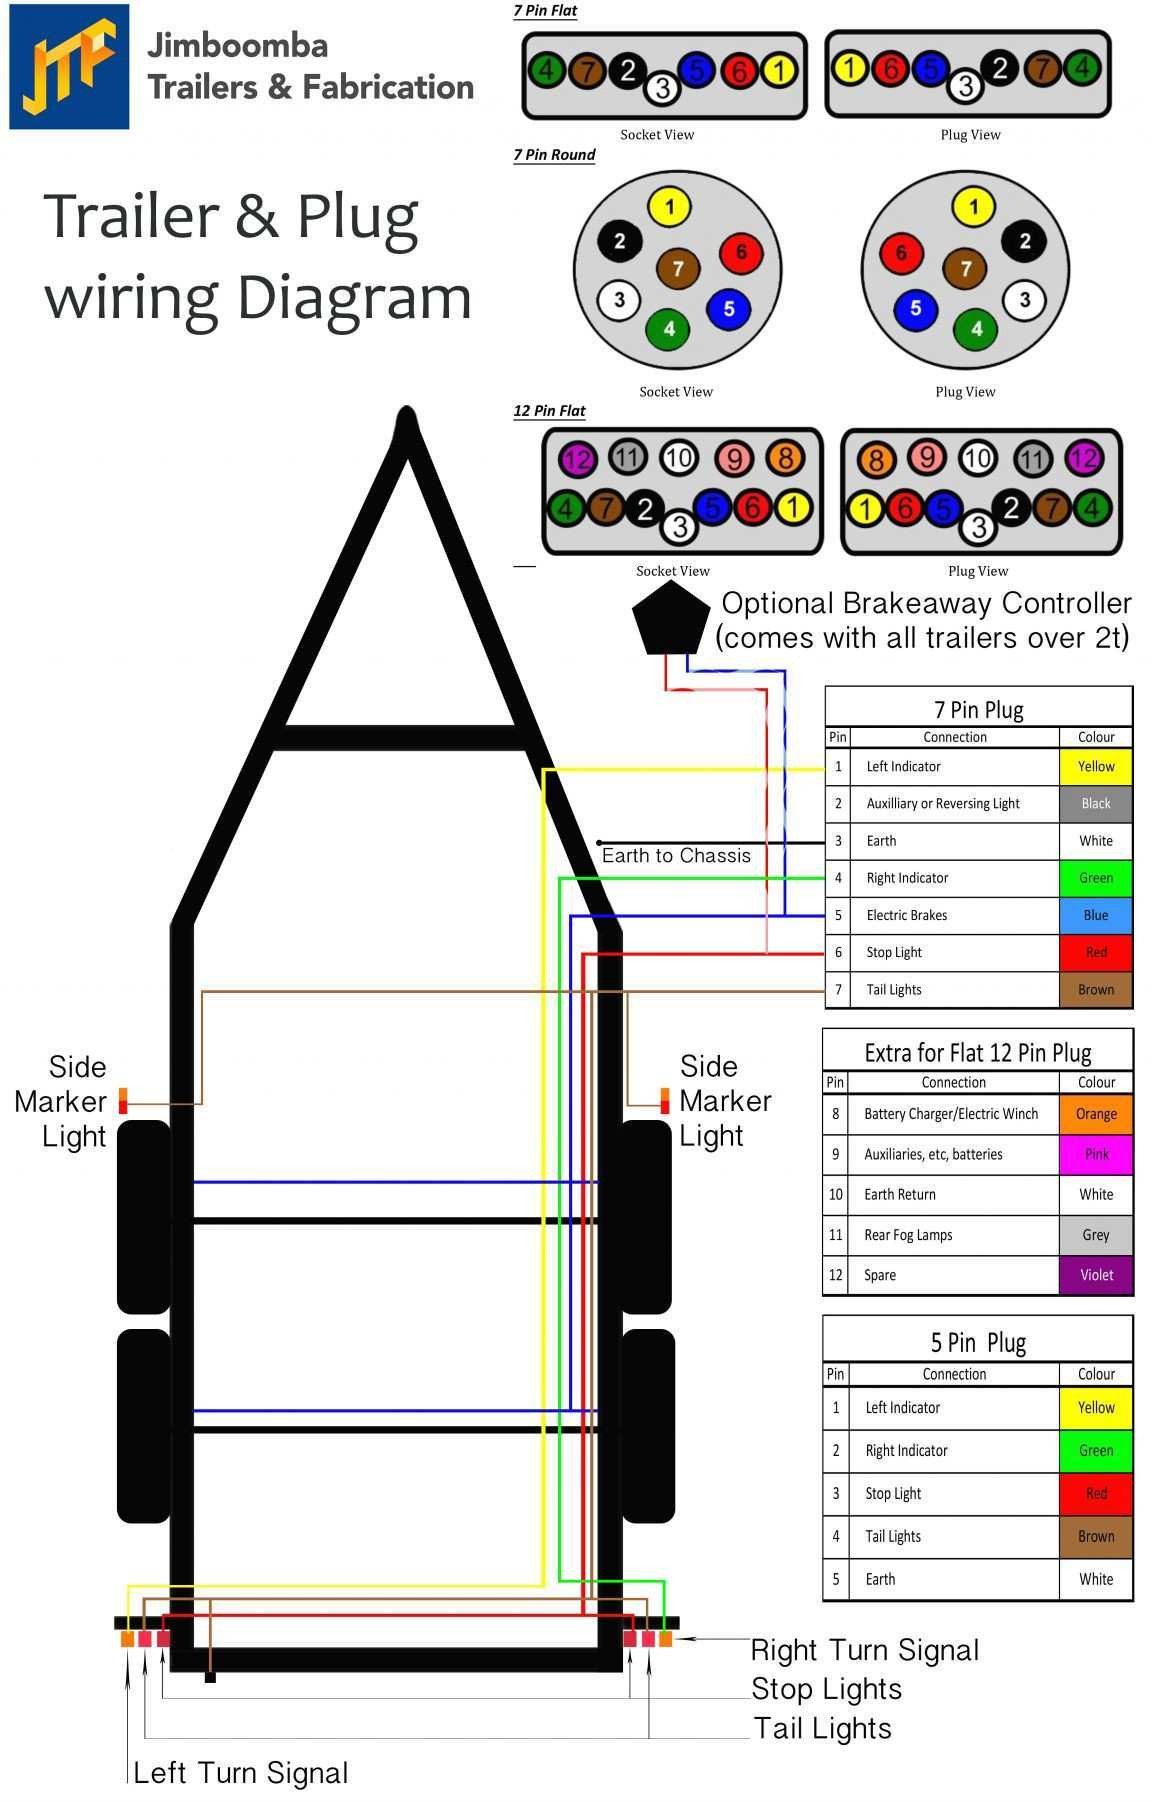 4 lamp t8 ballast wiring diagram new charming i feel right to make rh thespartanchronicle